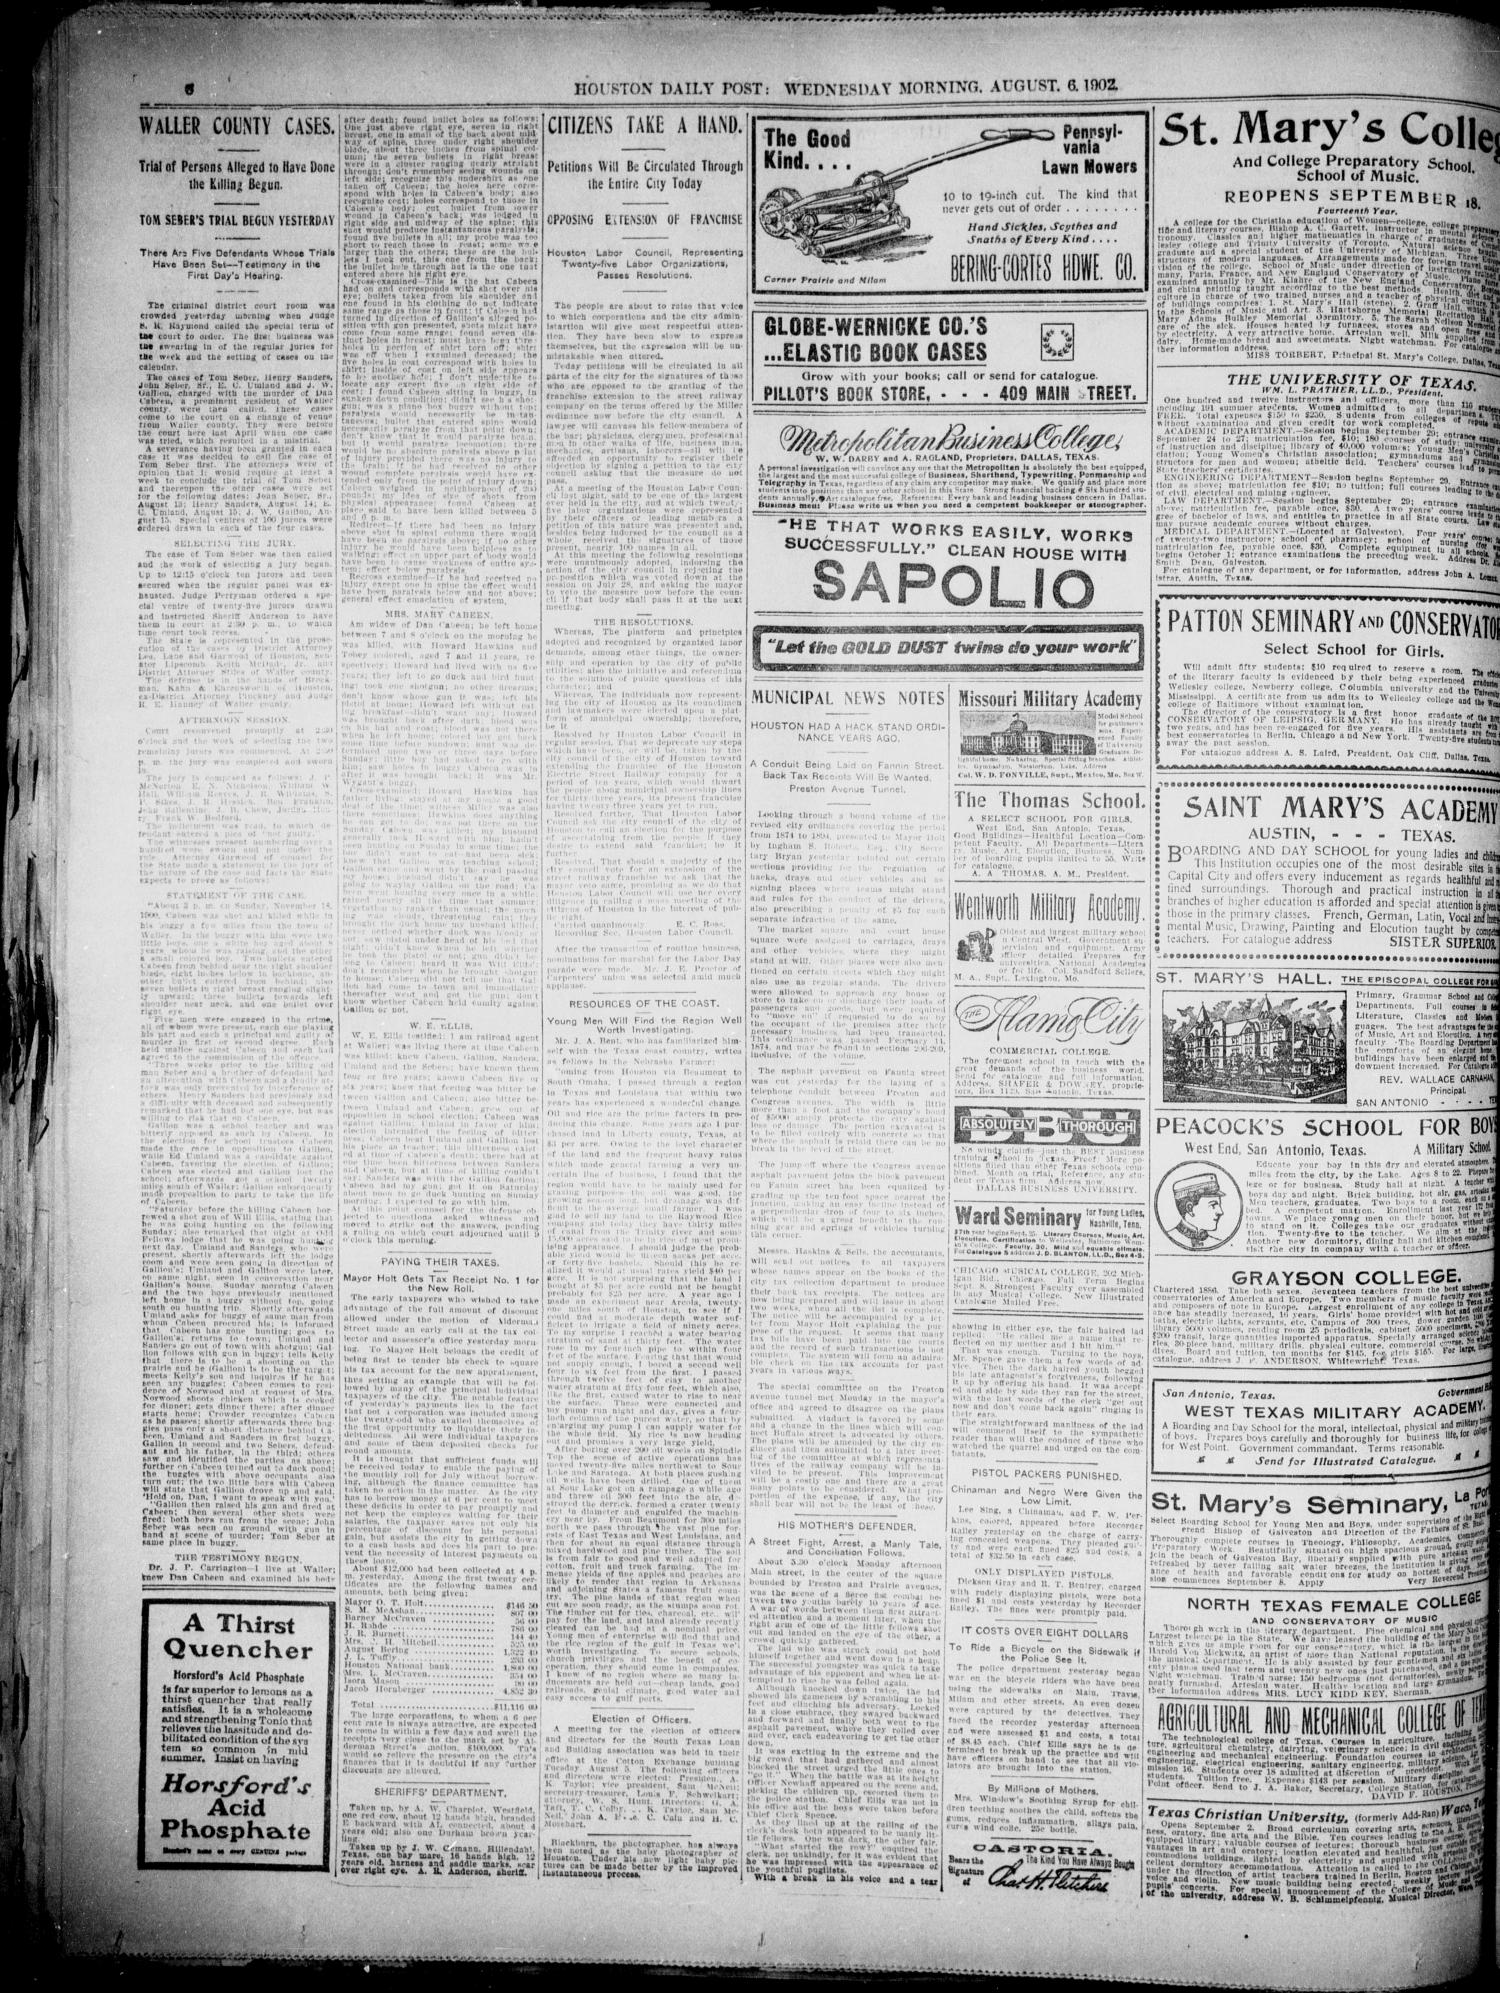 The Houston Daily Post (Houston, Tex.), Vol. XVIIITH YEAR, No. 124, Ed. 1,  Wednesday, August 6, 1902 - Page 6 of 12 - The Portal to Texas History